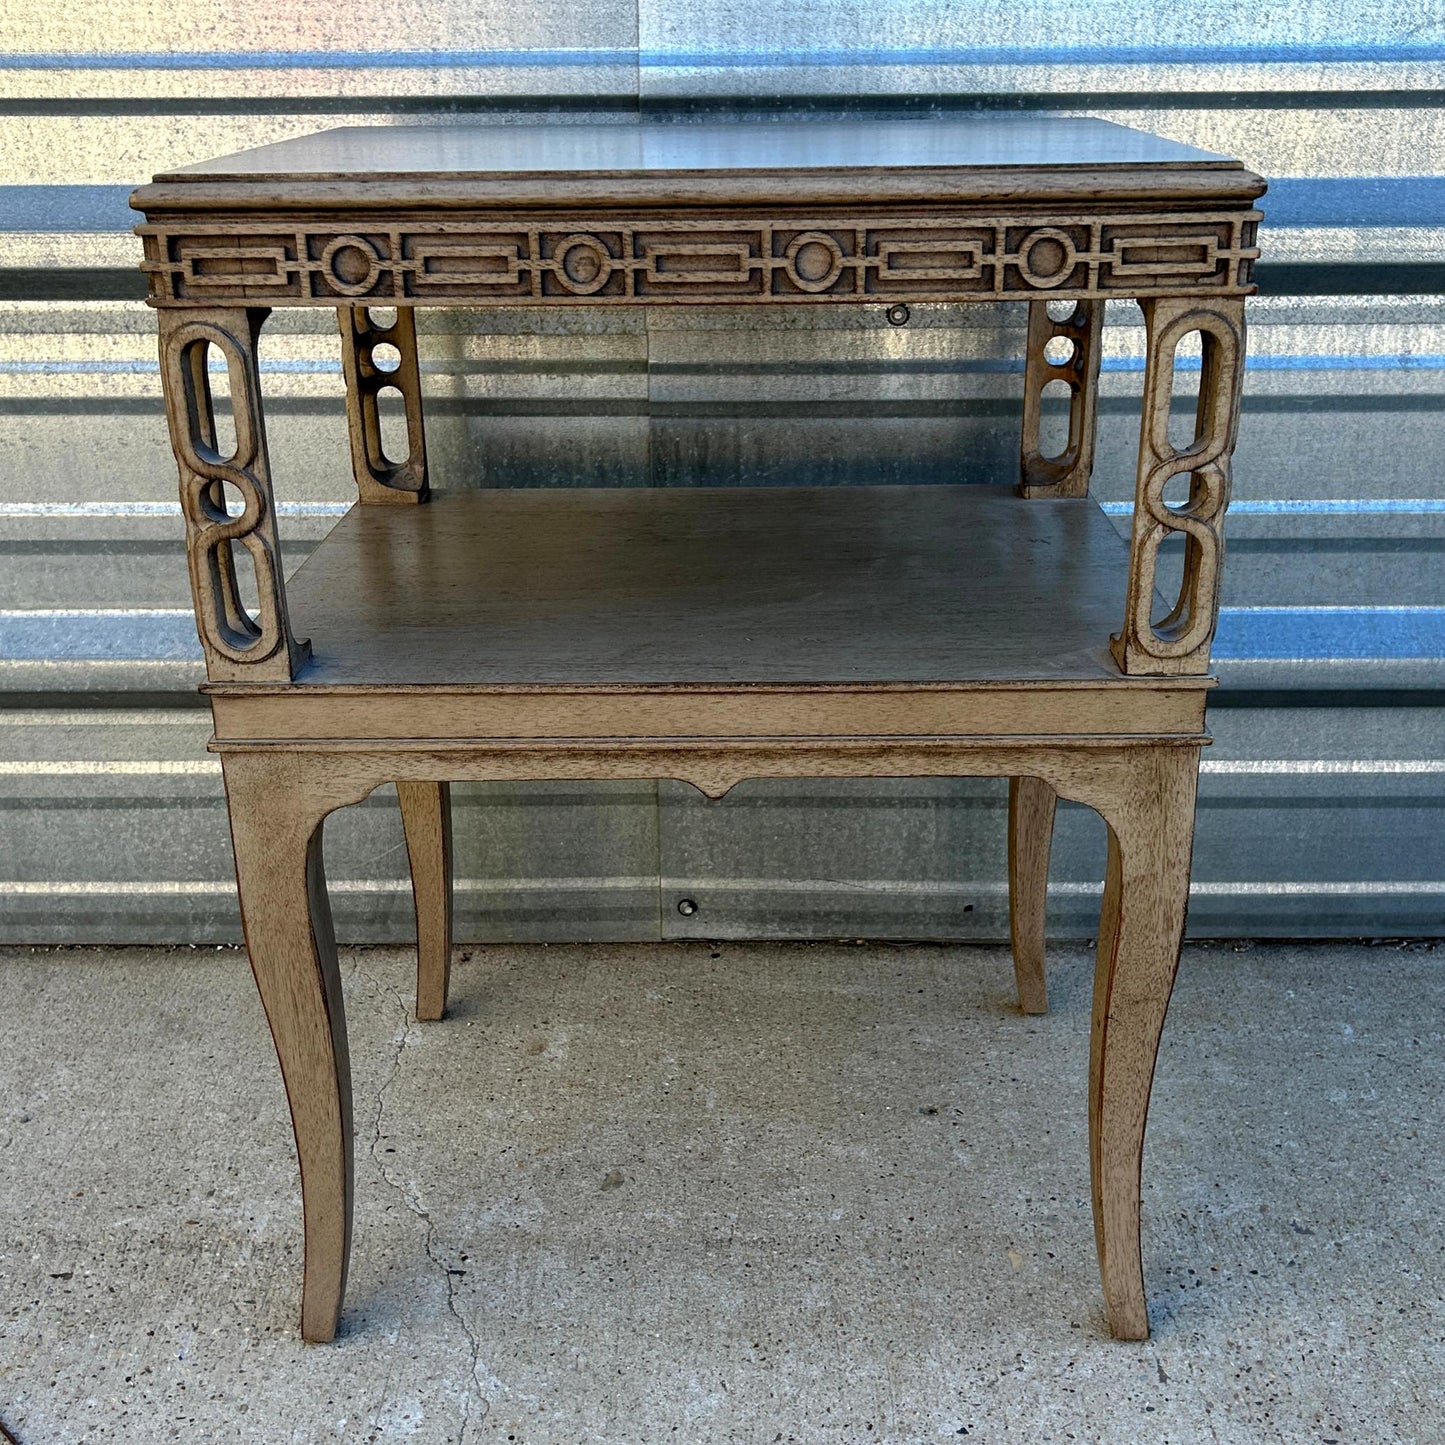 Two Tier Accent Table